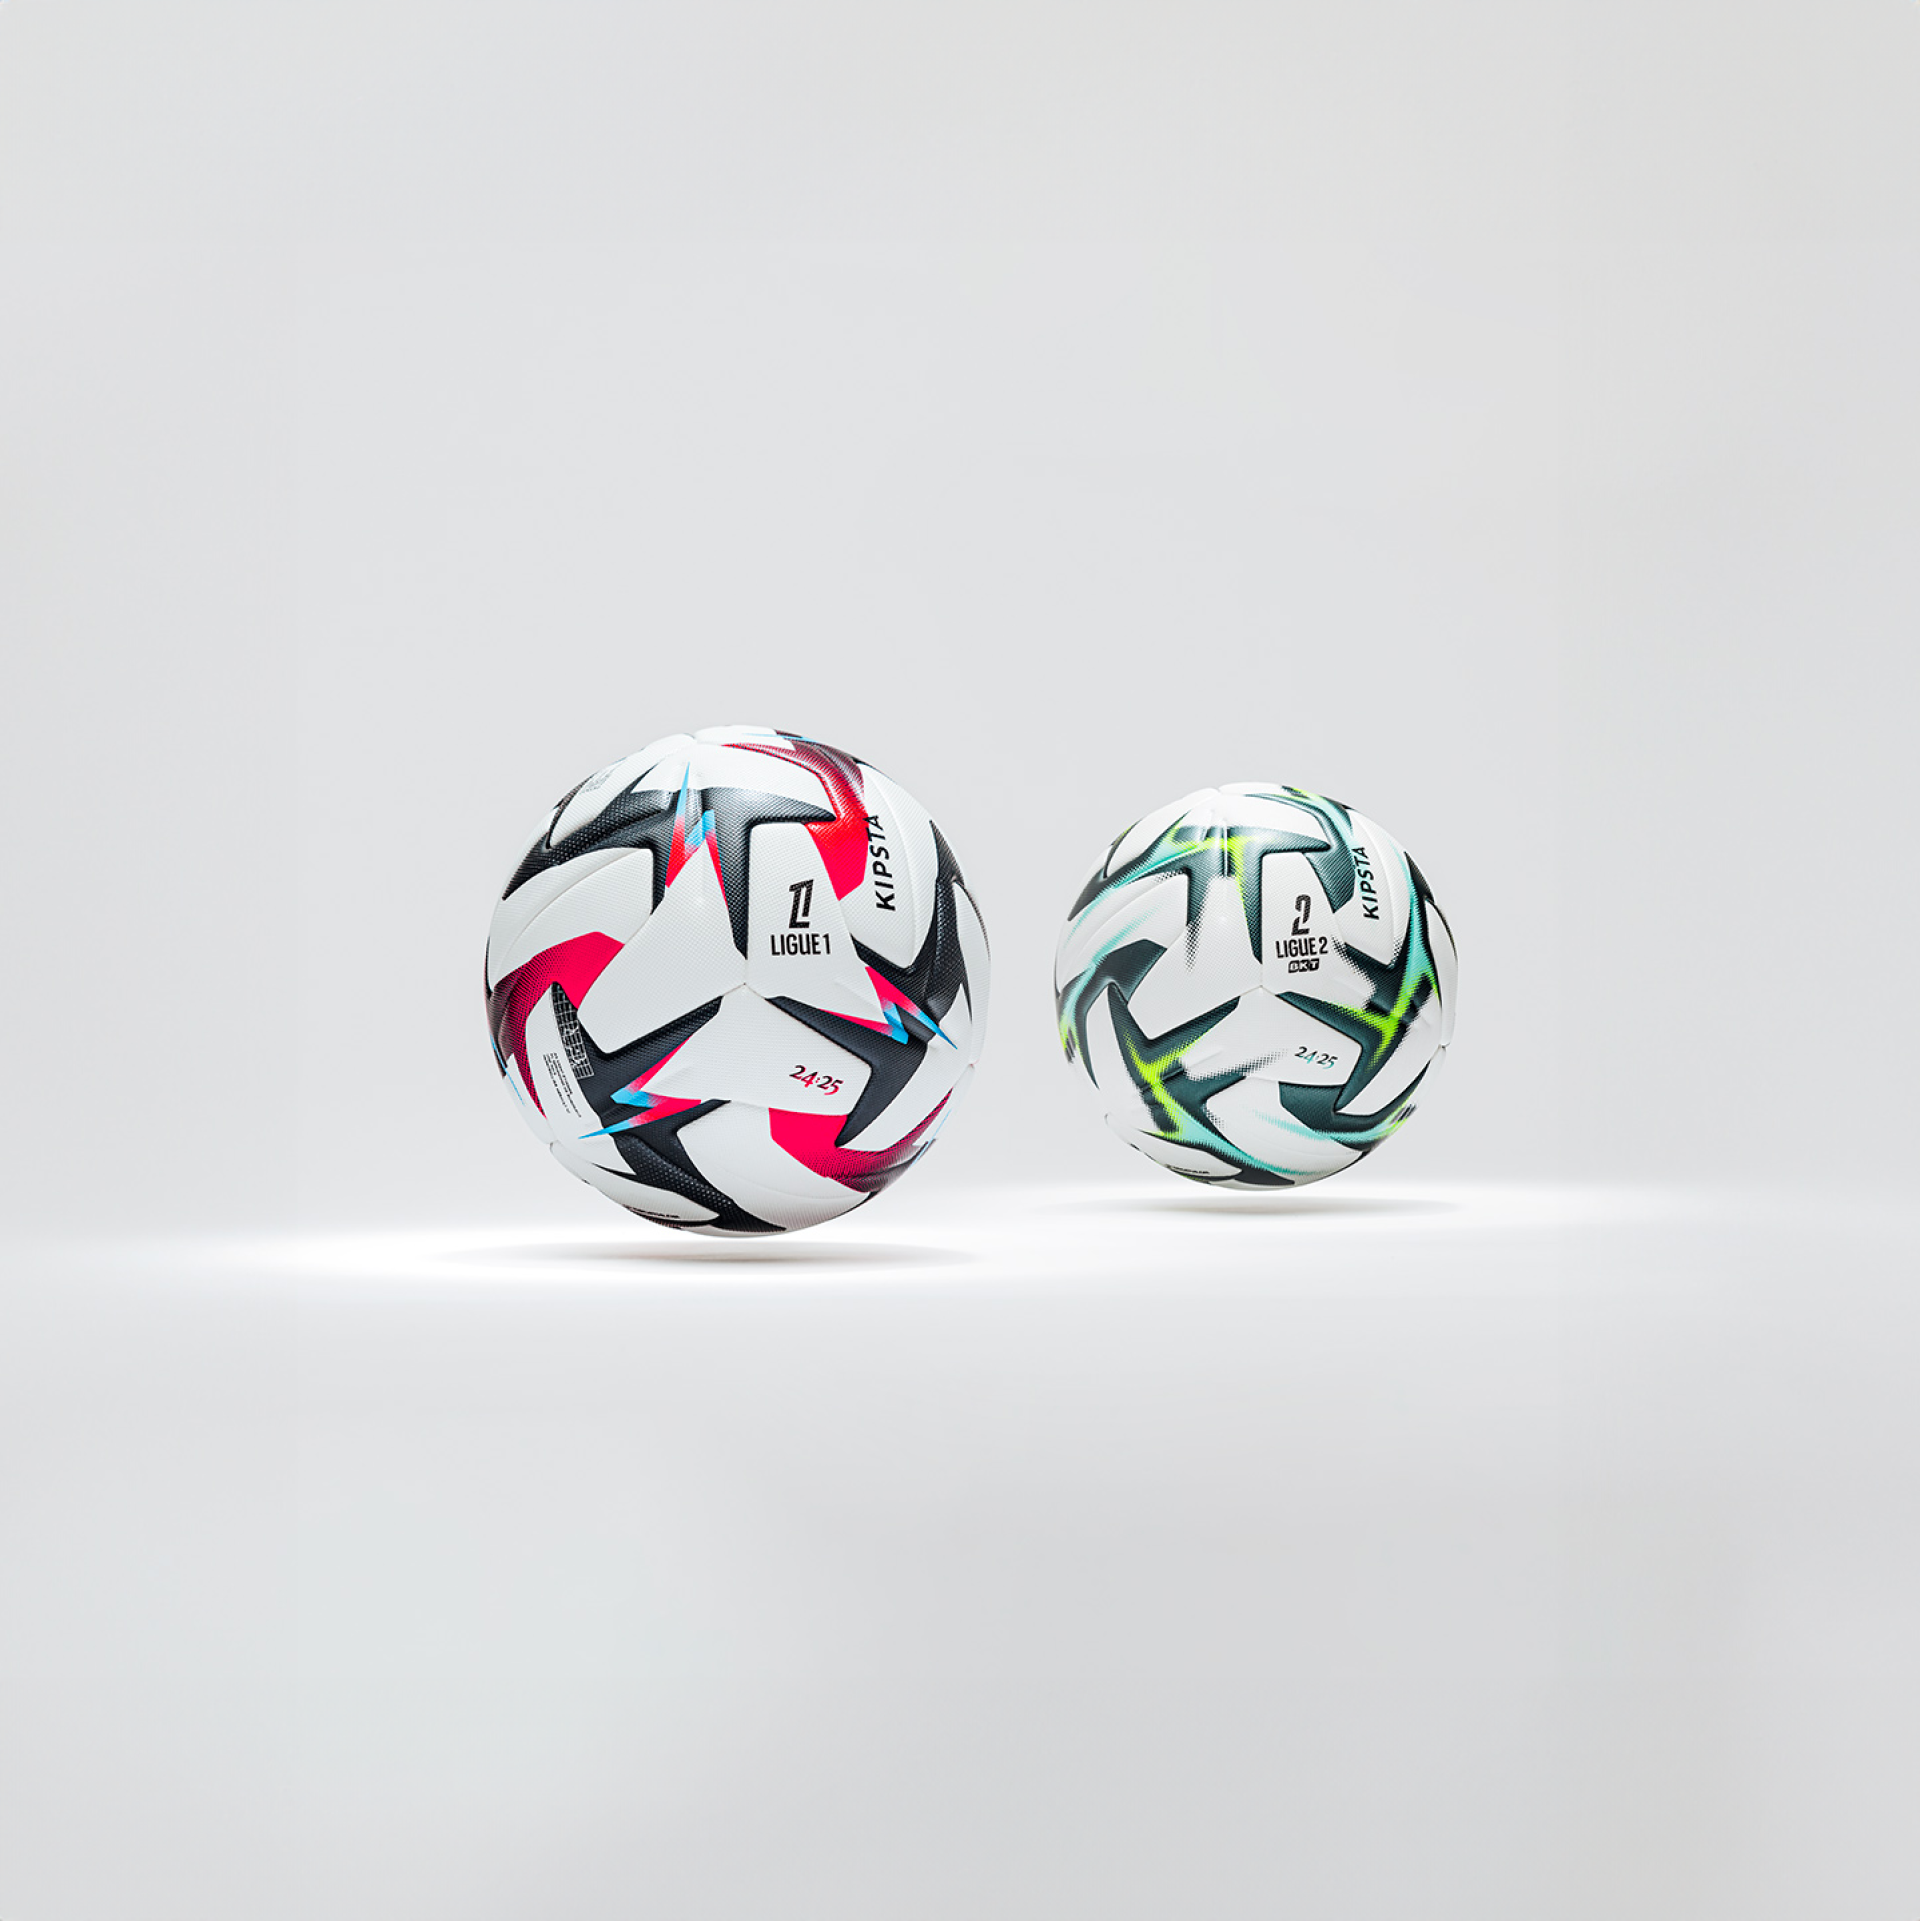 New official Kipsta balls for Ligue 1 and Ligue 2 BKT